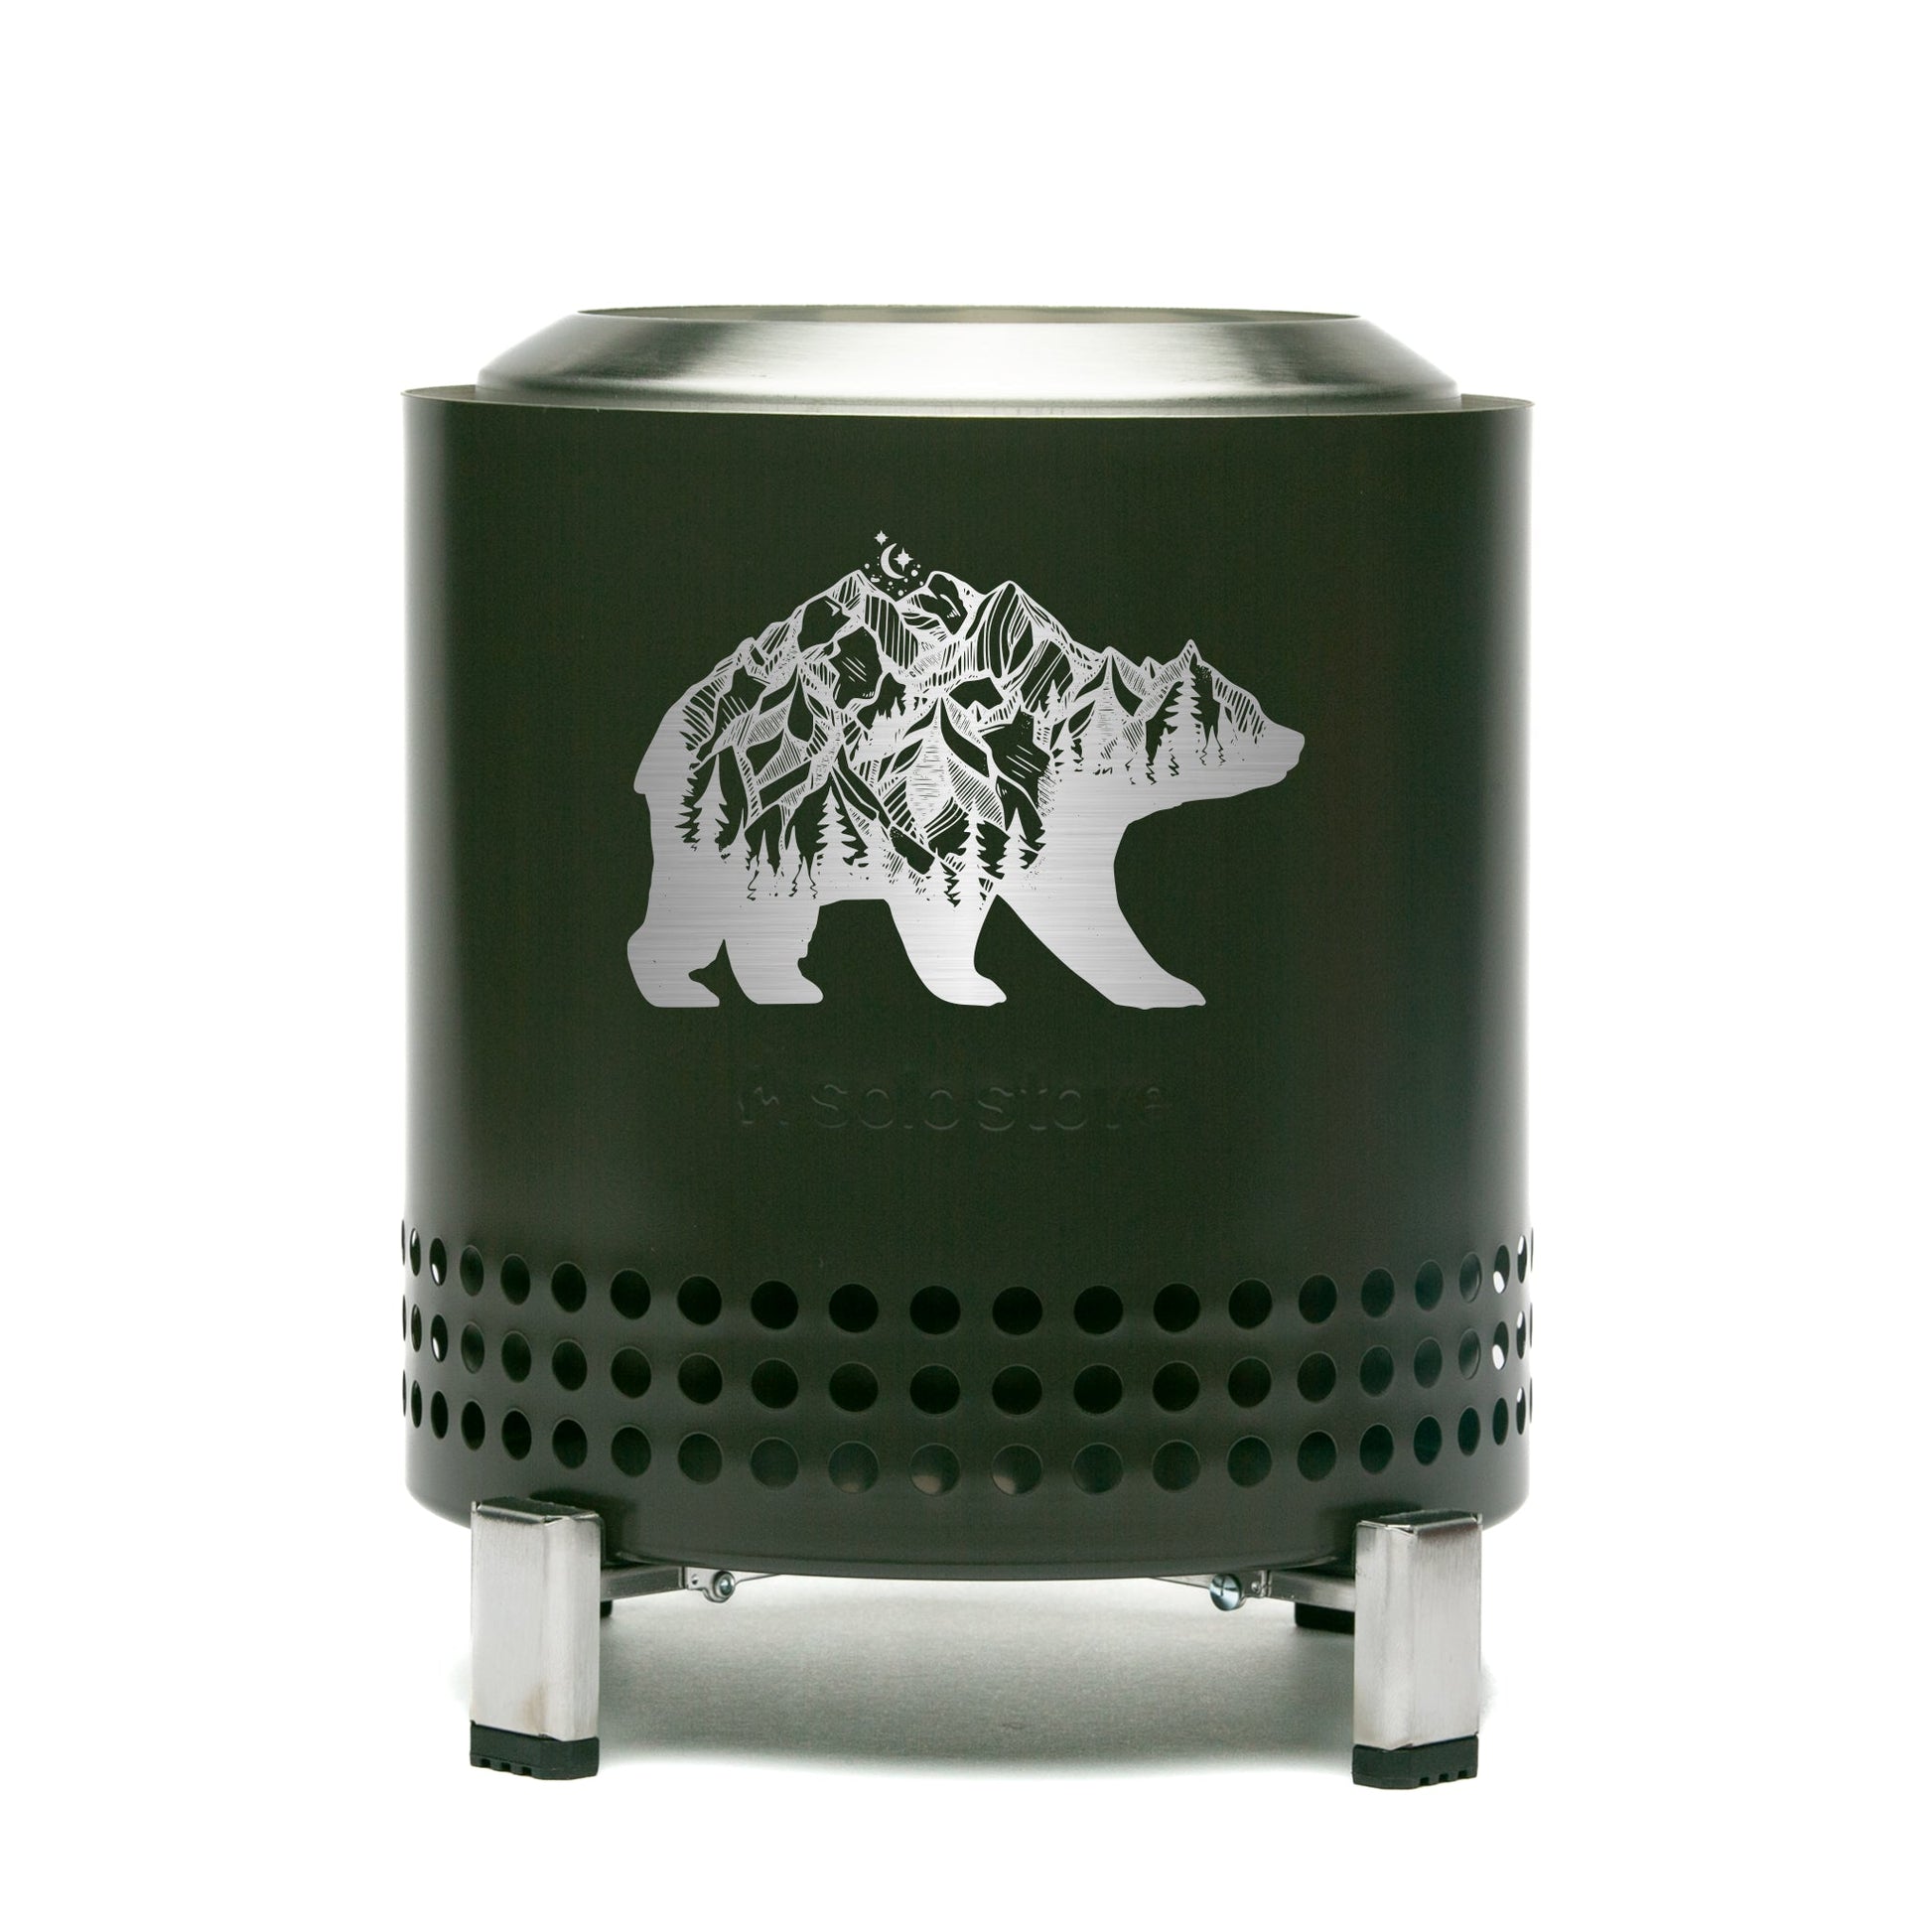 Personalized solo stove® Mesa XL - Etchified-solo stove®-ETC-ST-MESAXL-SSMESAXL-ASH-Swaasi-Laser-Primary